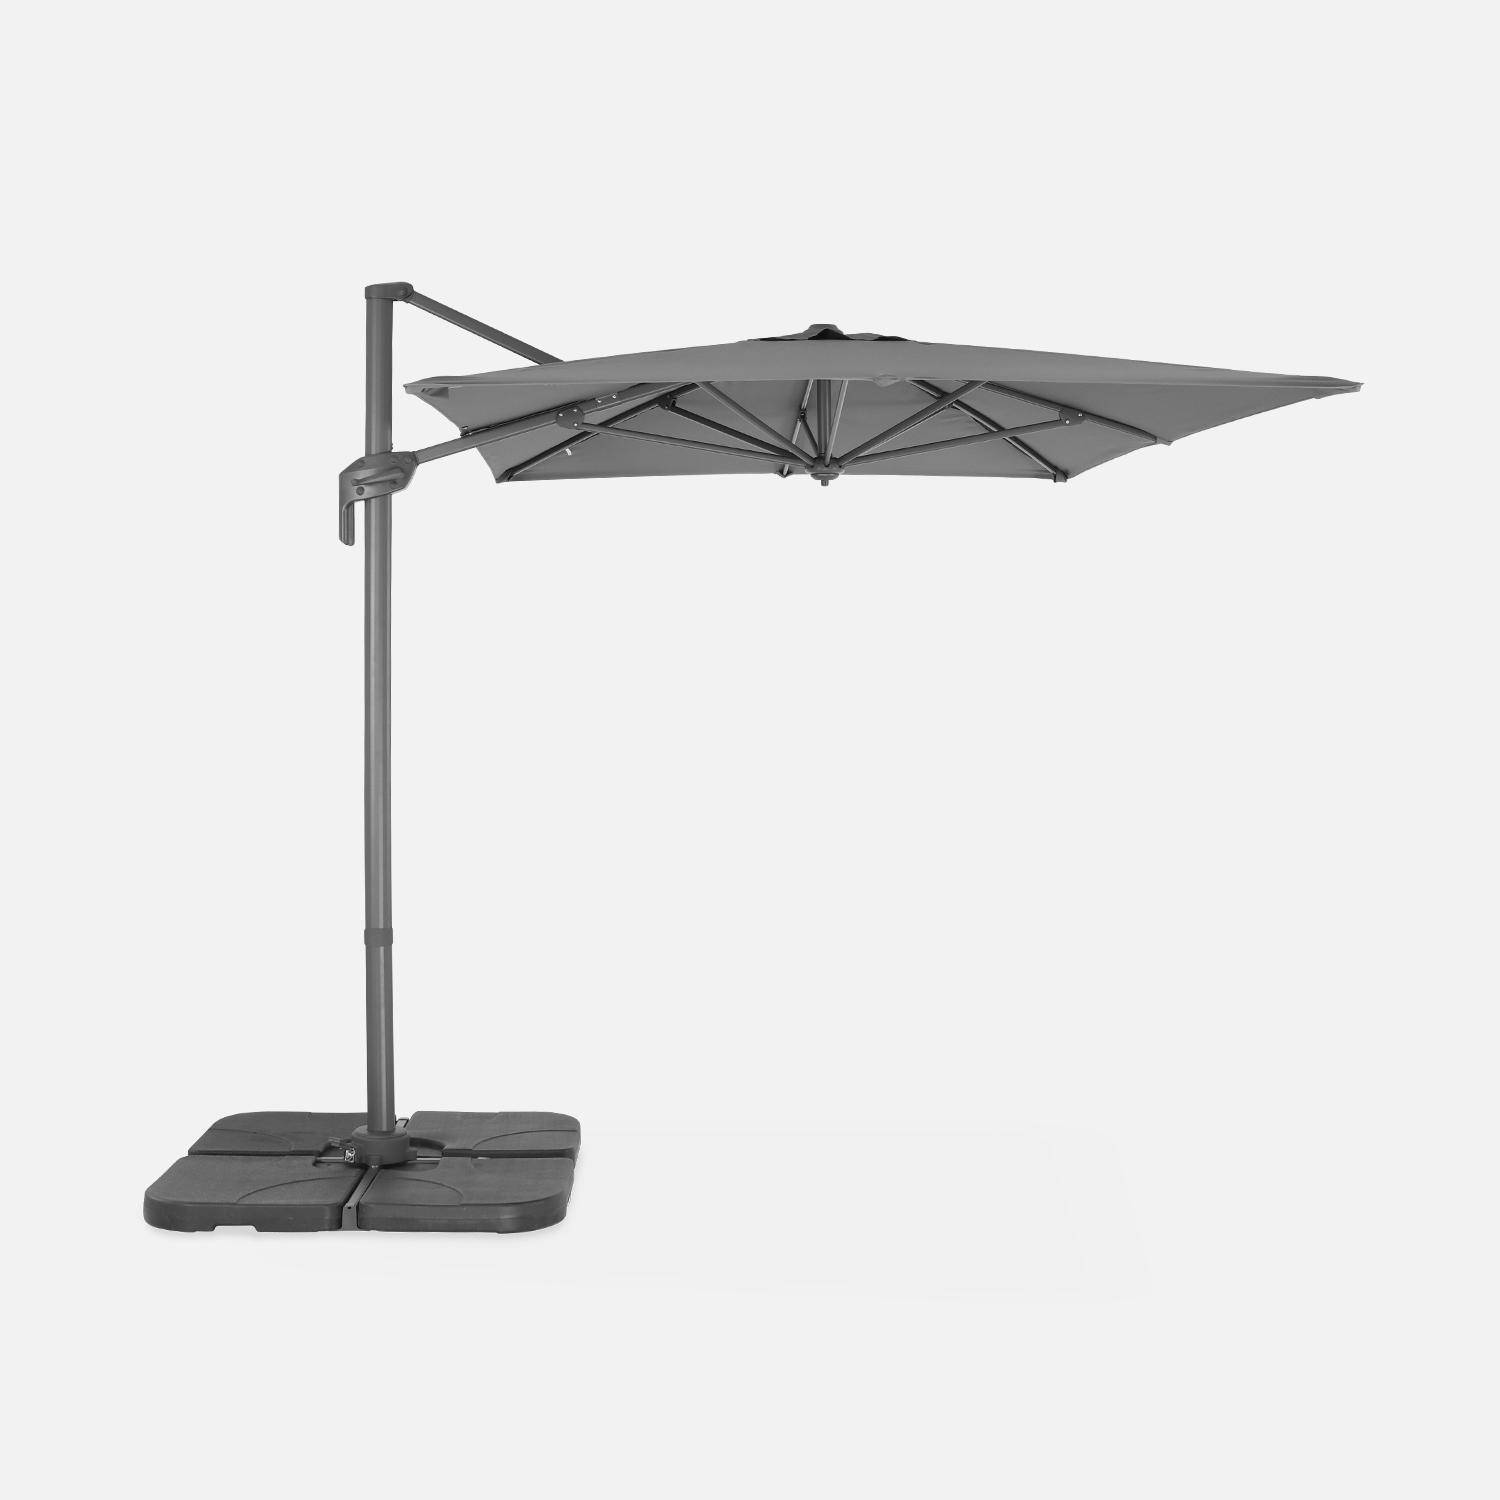 2x3m rectangular cantilever paraso - parasol can be tilted, folded and rotated 360 degreesl - Antibes - Grey Photo4